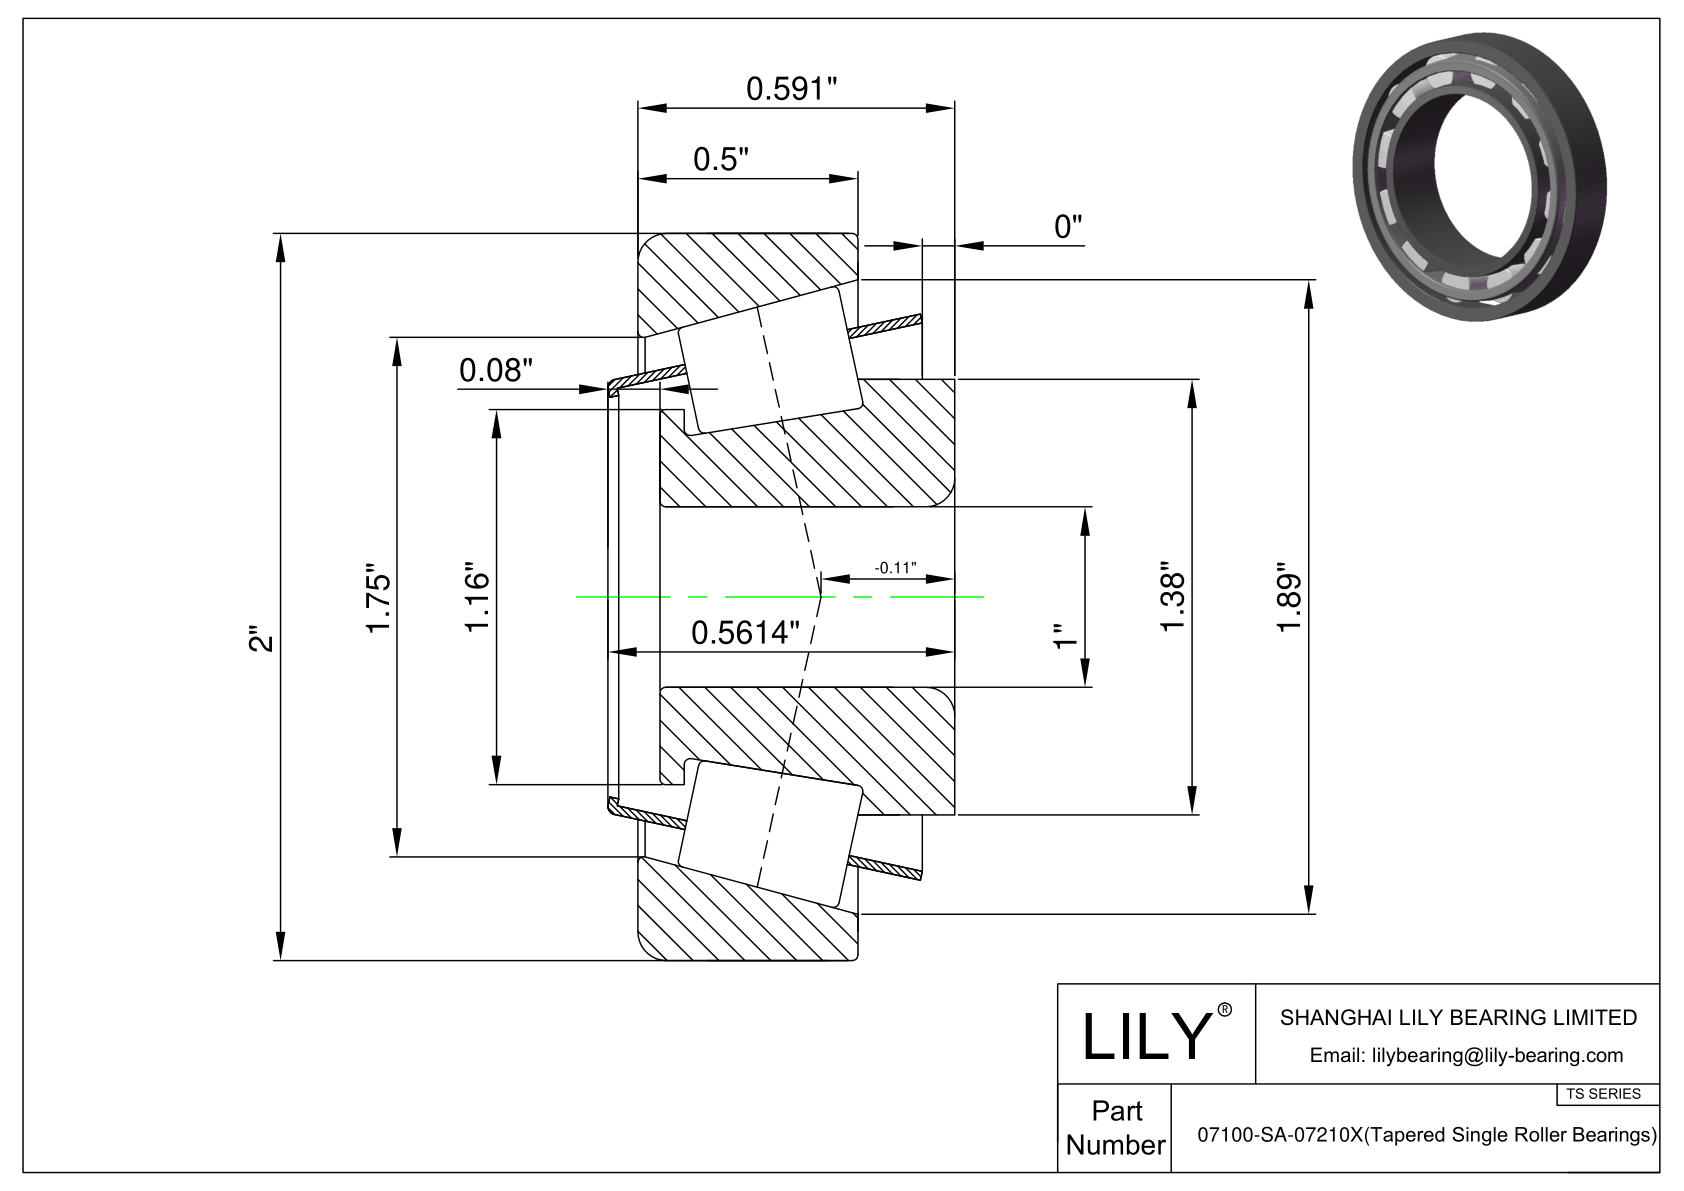 07100-SA-07210X TS (Tapered Single Roller Bearings) (Imperial) cad drawing